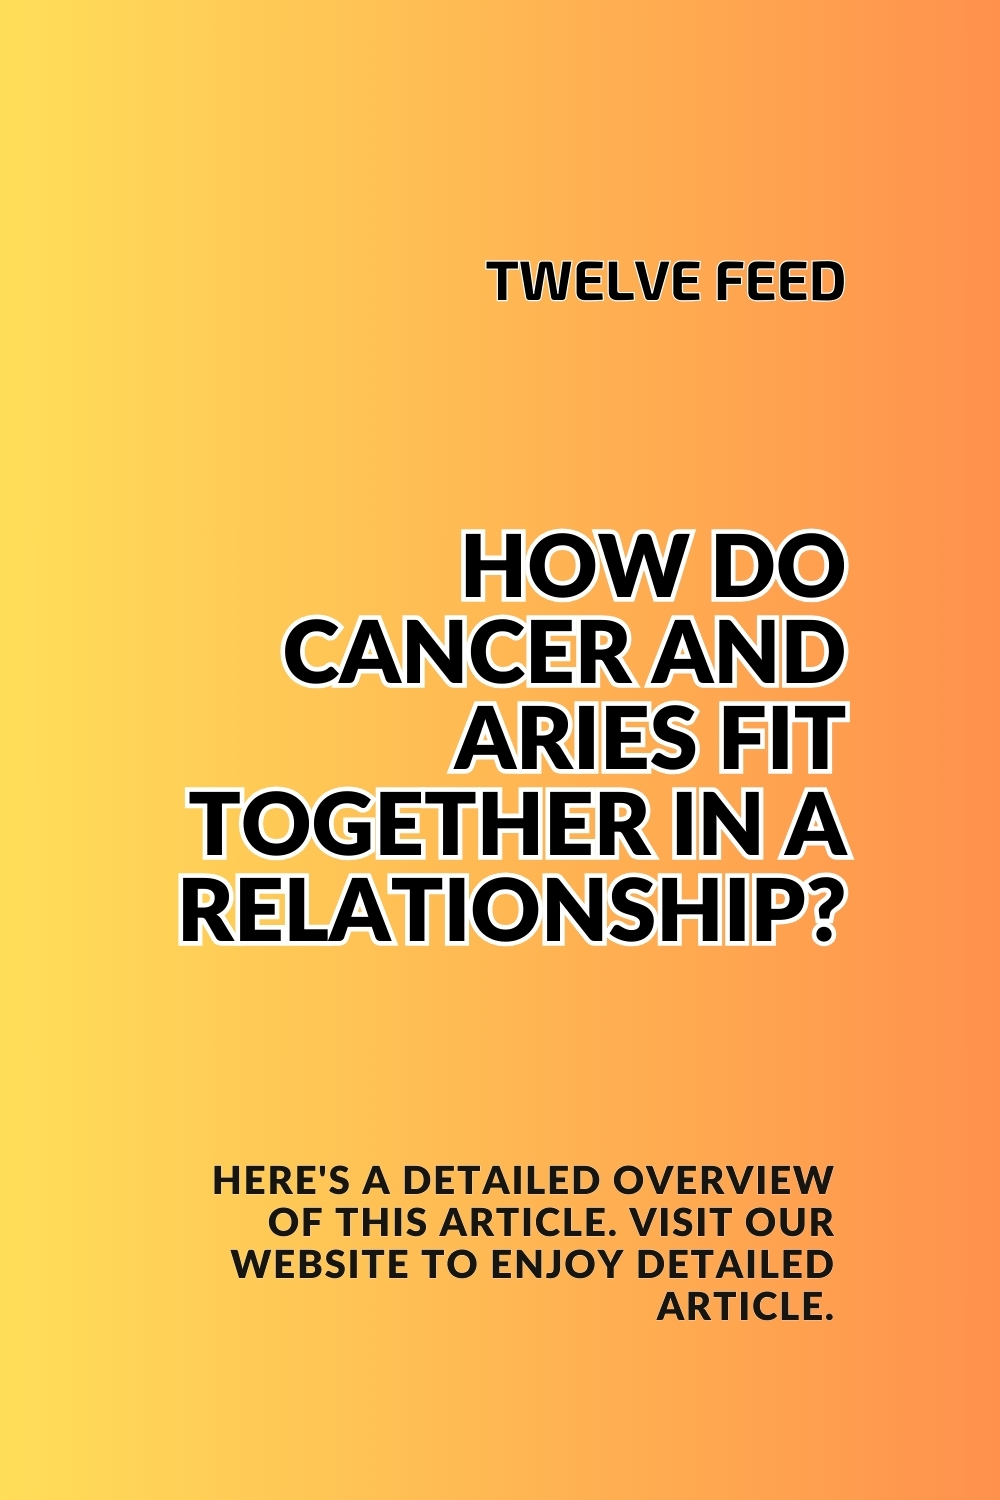 How Do Cancer And Aries Fit Together In A Relationship?